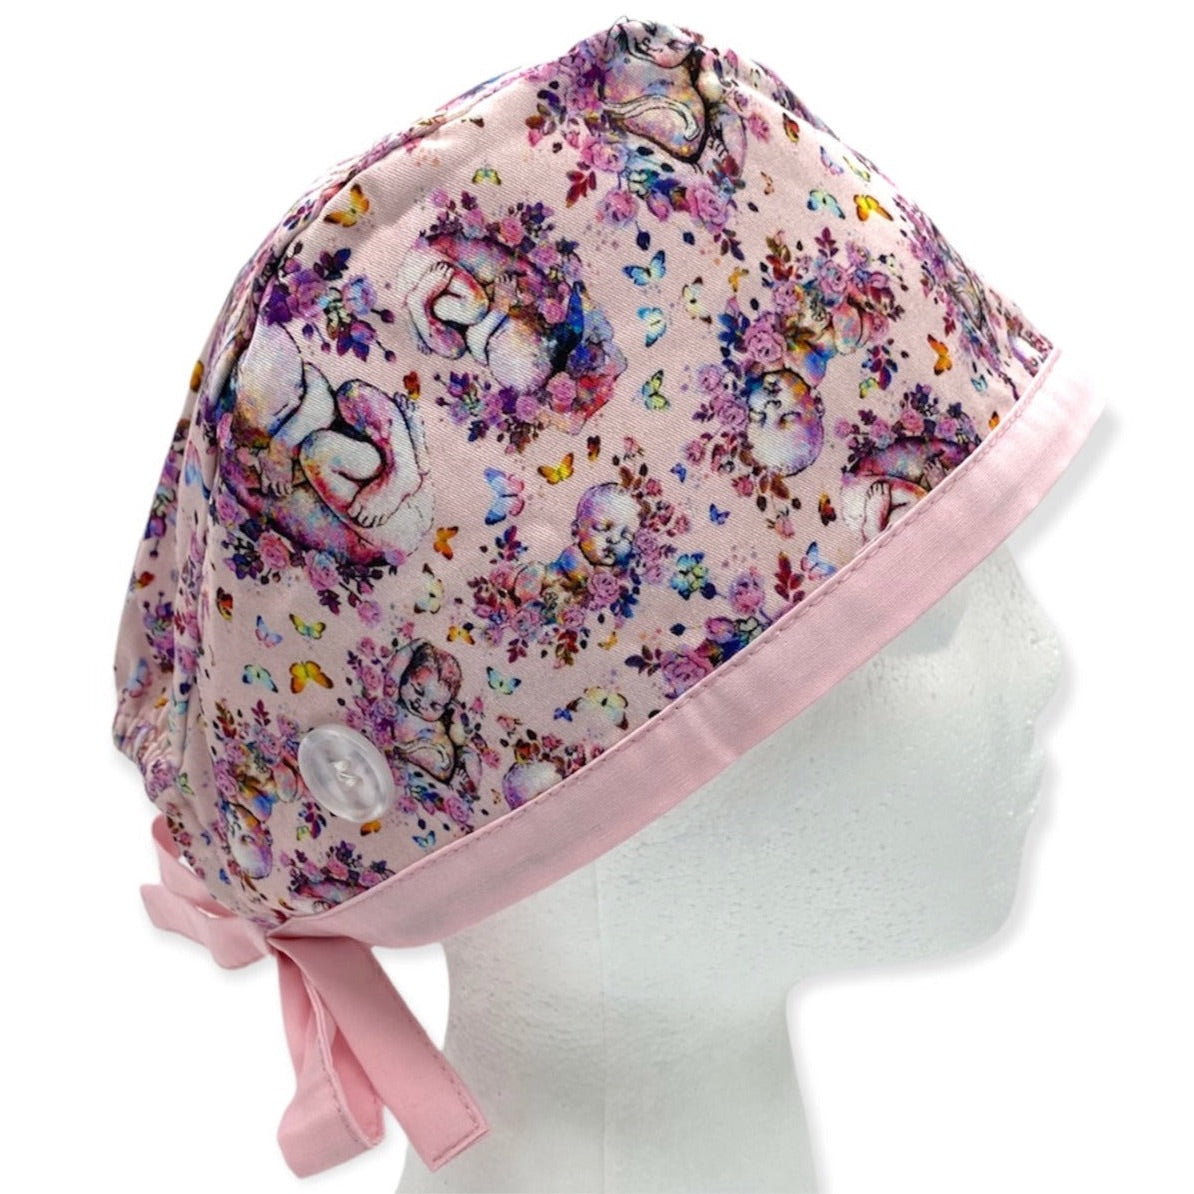 labor and delivery, obgyn, baby surgical scrub cap with buttons and satin lining. Best scrub hats but sunshine shops co